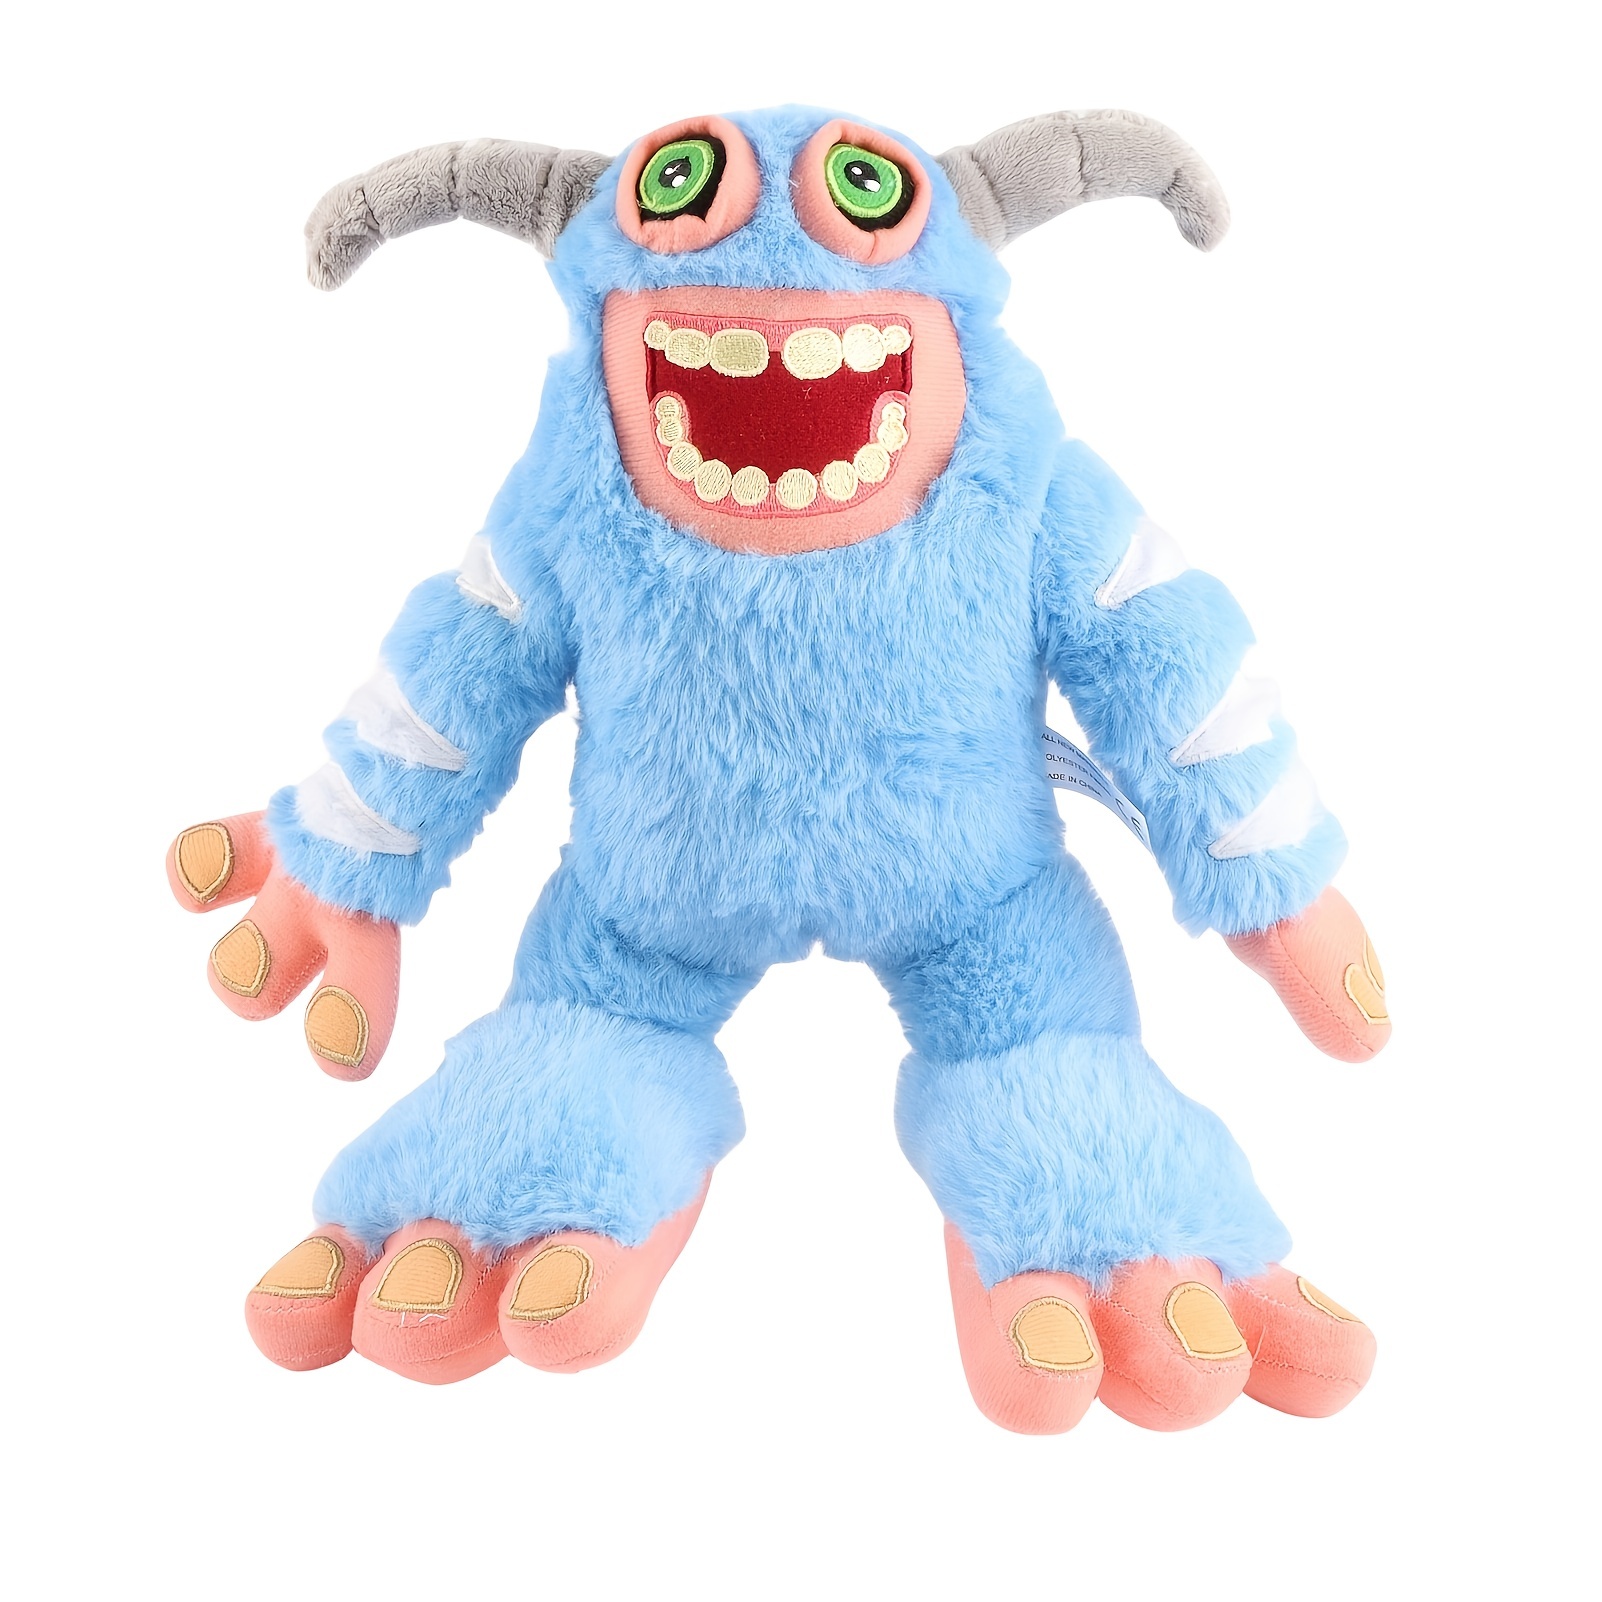 Garten of Banban Plush 9.84 Inch Banban Garden Ghost Tooth Plush Doll Great  Stuffed Animal Plush Doll Gift for Fans and Friends 